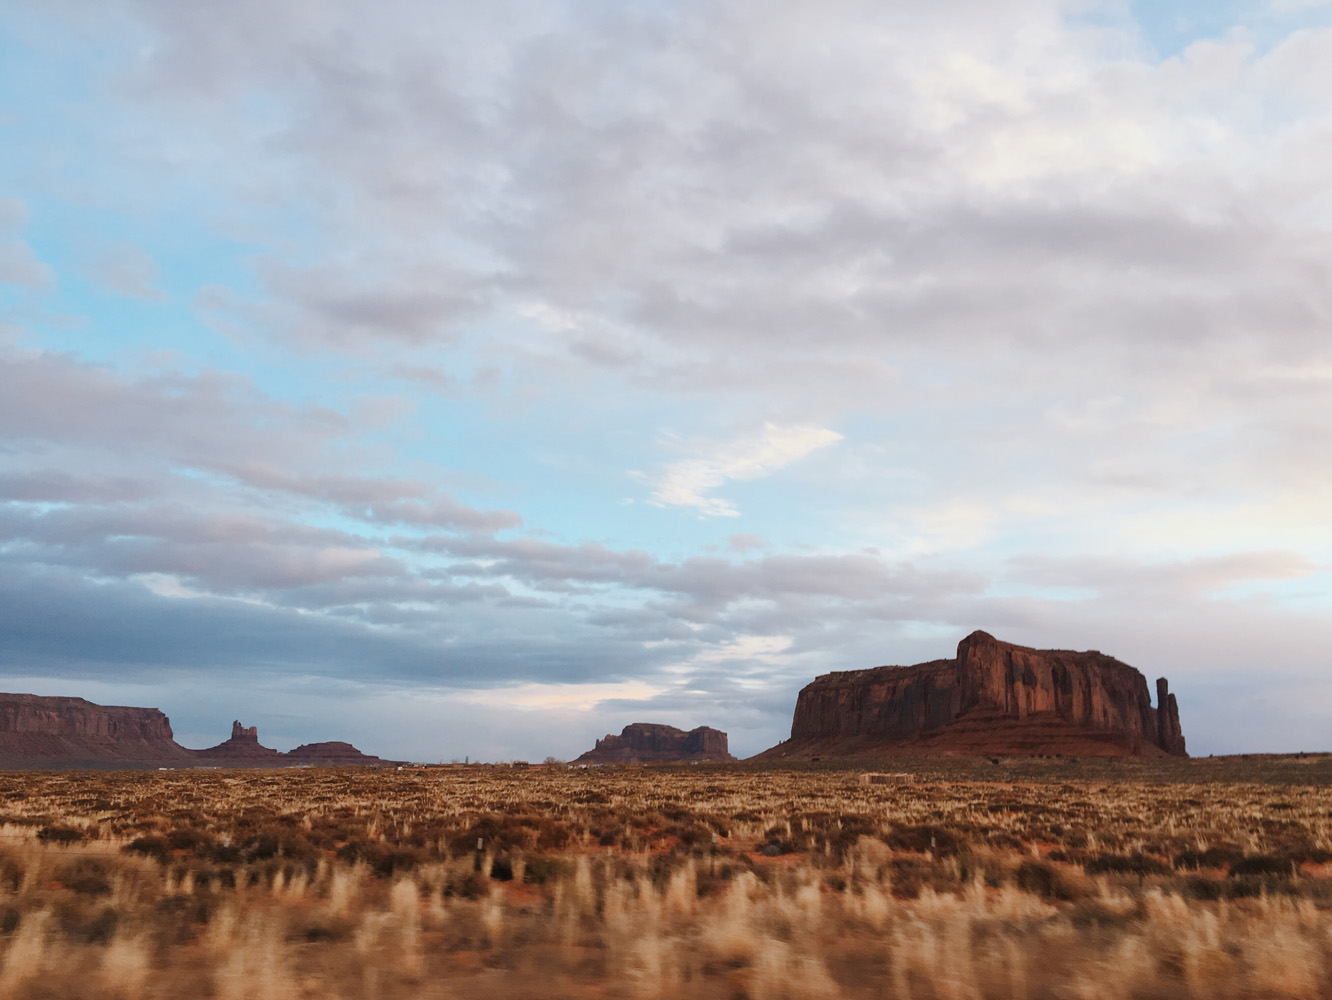 Driving into Monument Valley